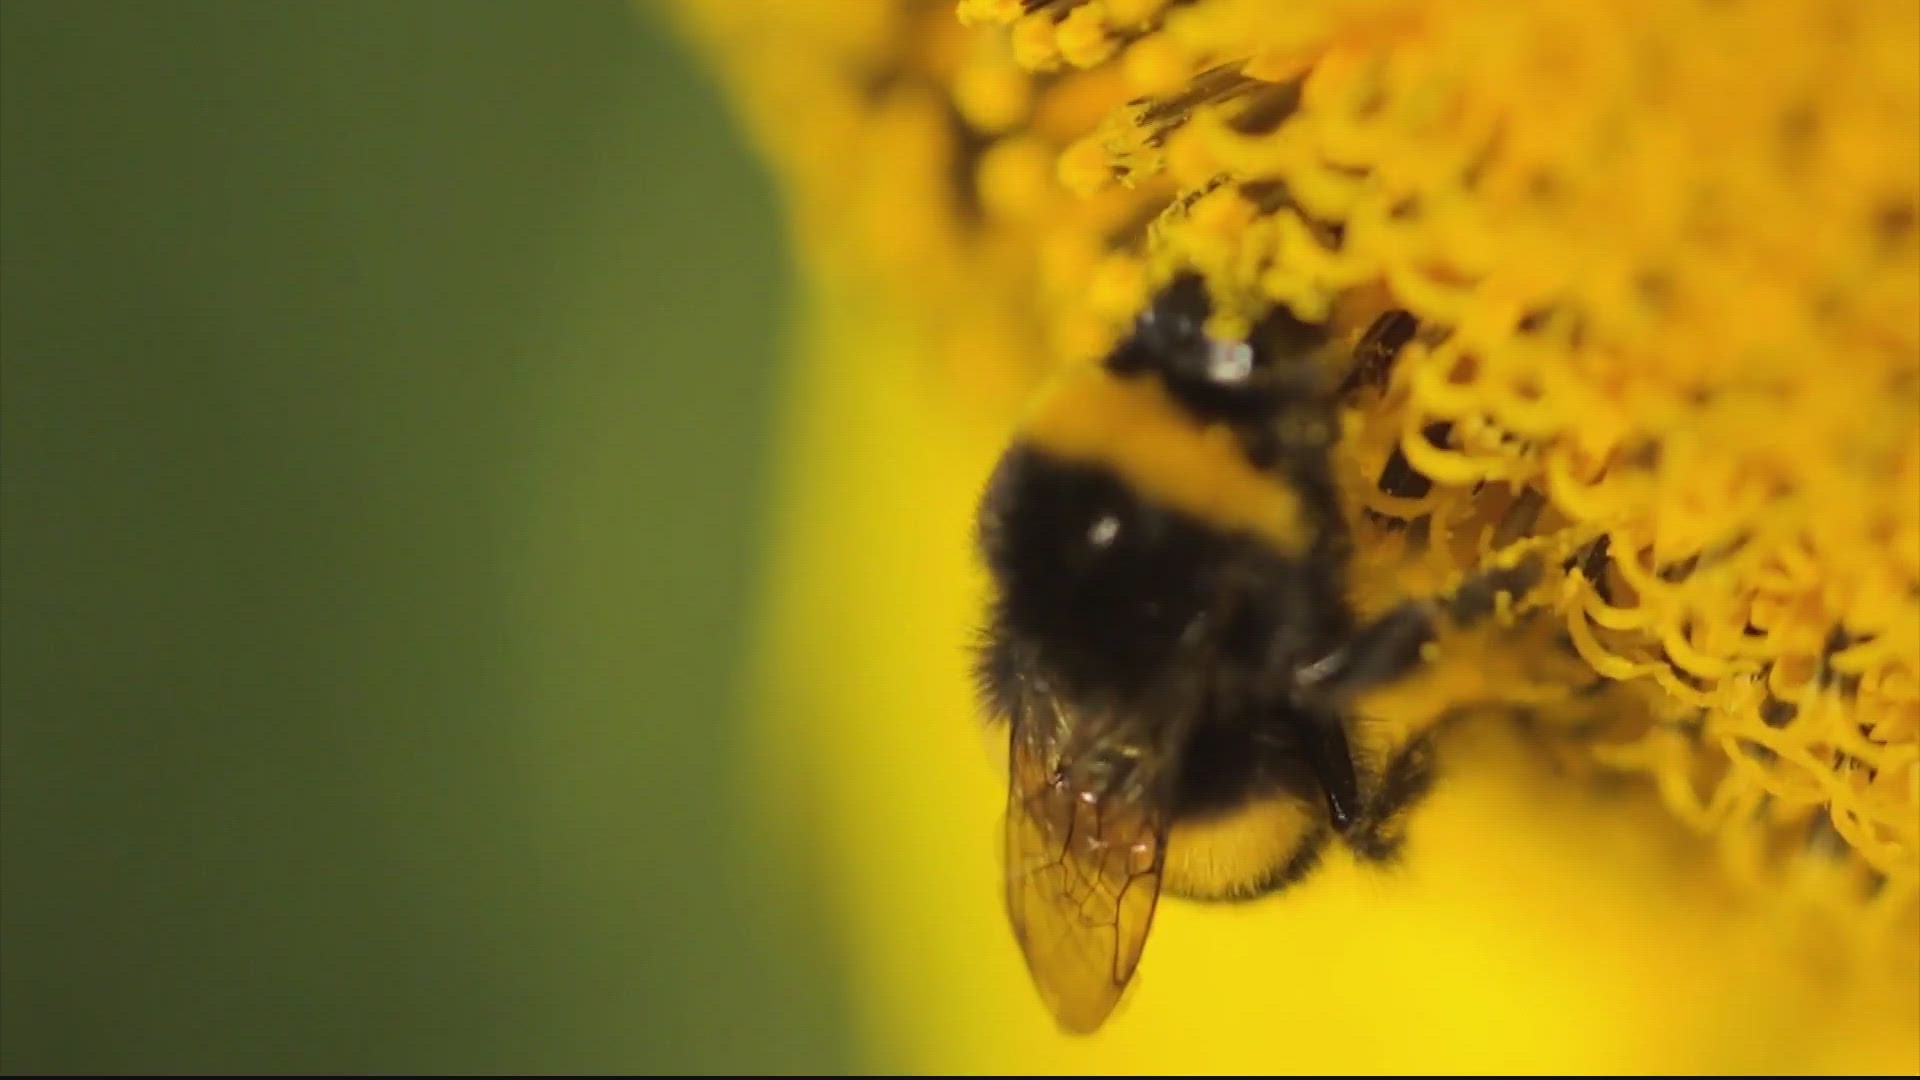 A new study is creating quite the buzz - it found bumblebees are actually - pretty smart.